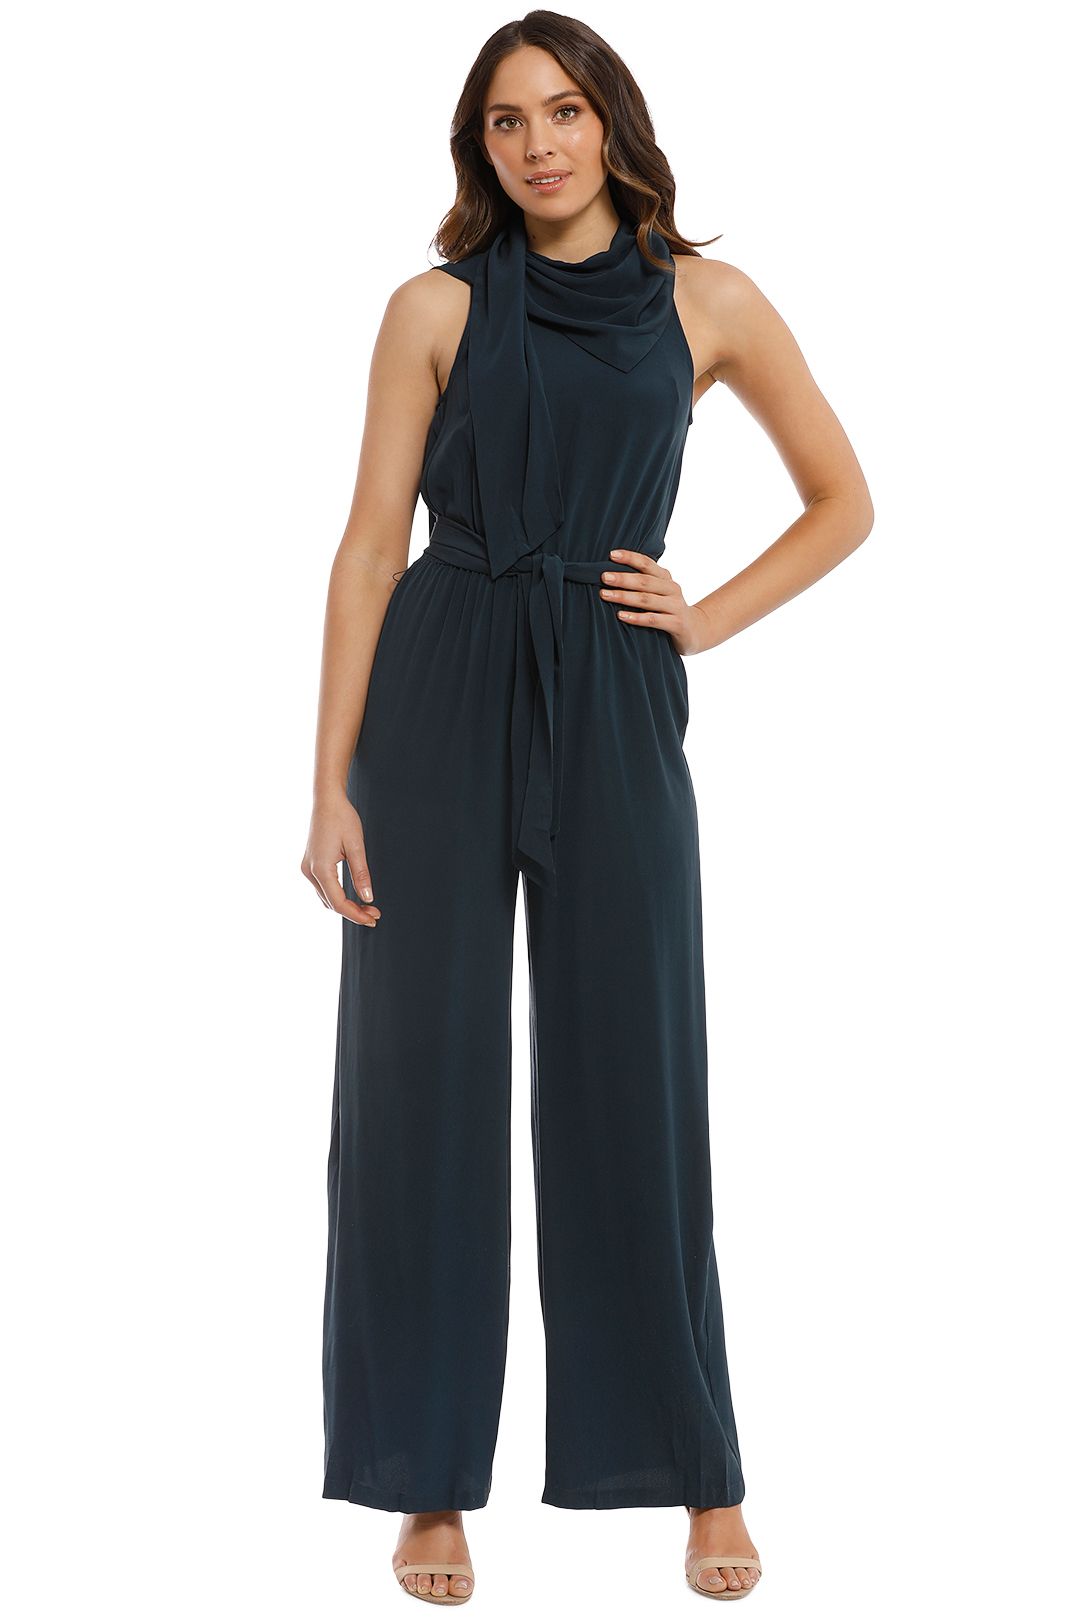 The Icon Jumpsuit in Petrol by Sass & Bide for Hire | GlamCorner